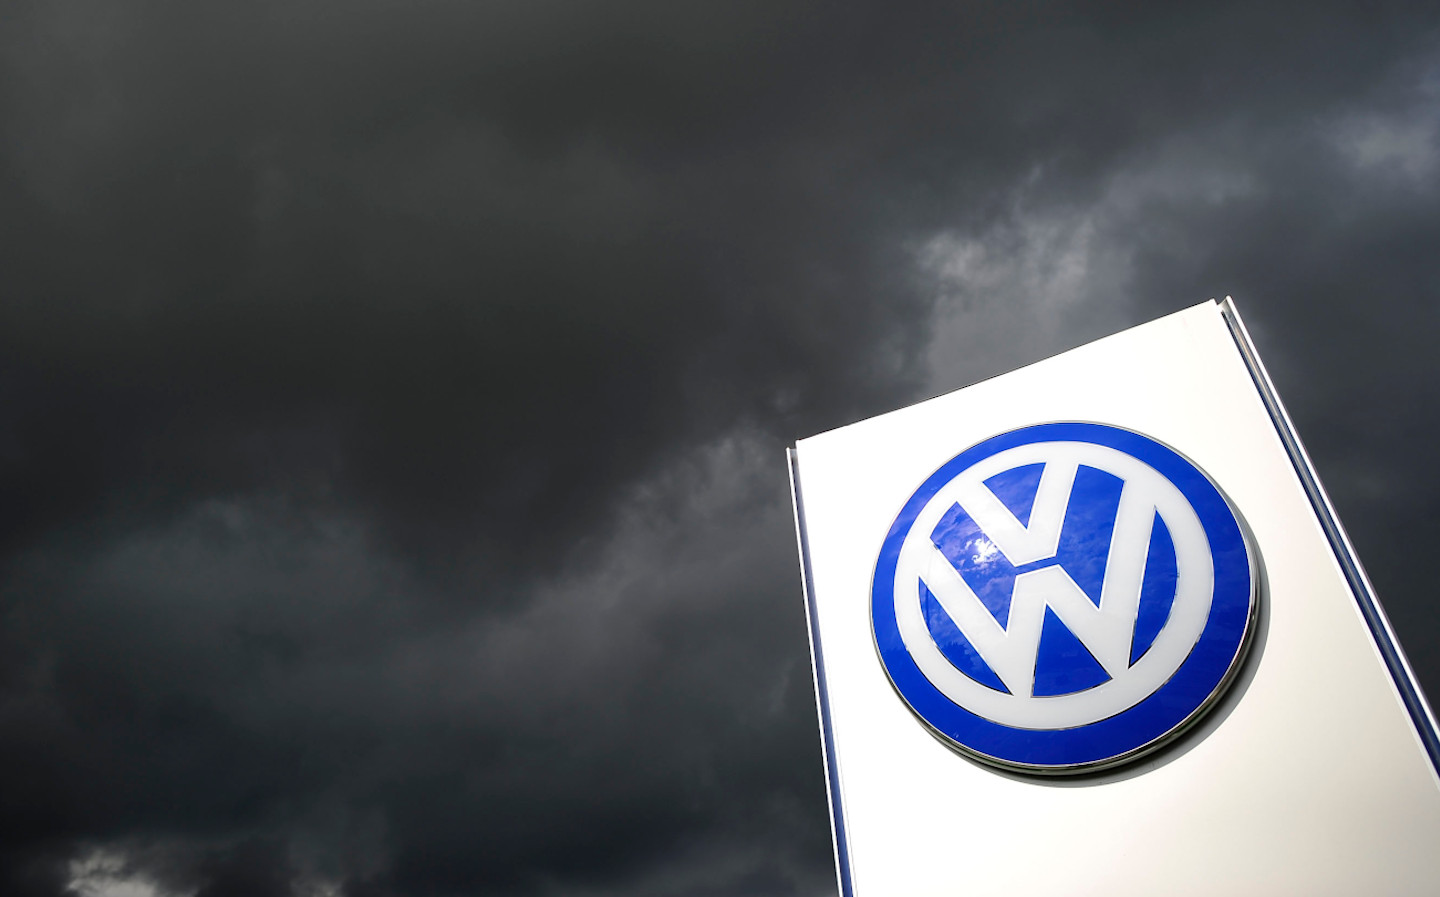 Volkswagen faces criticism after racist ad